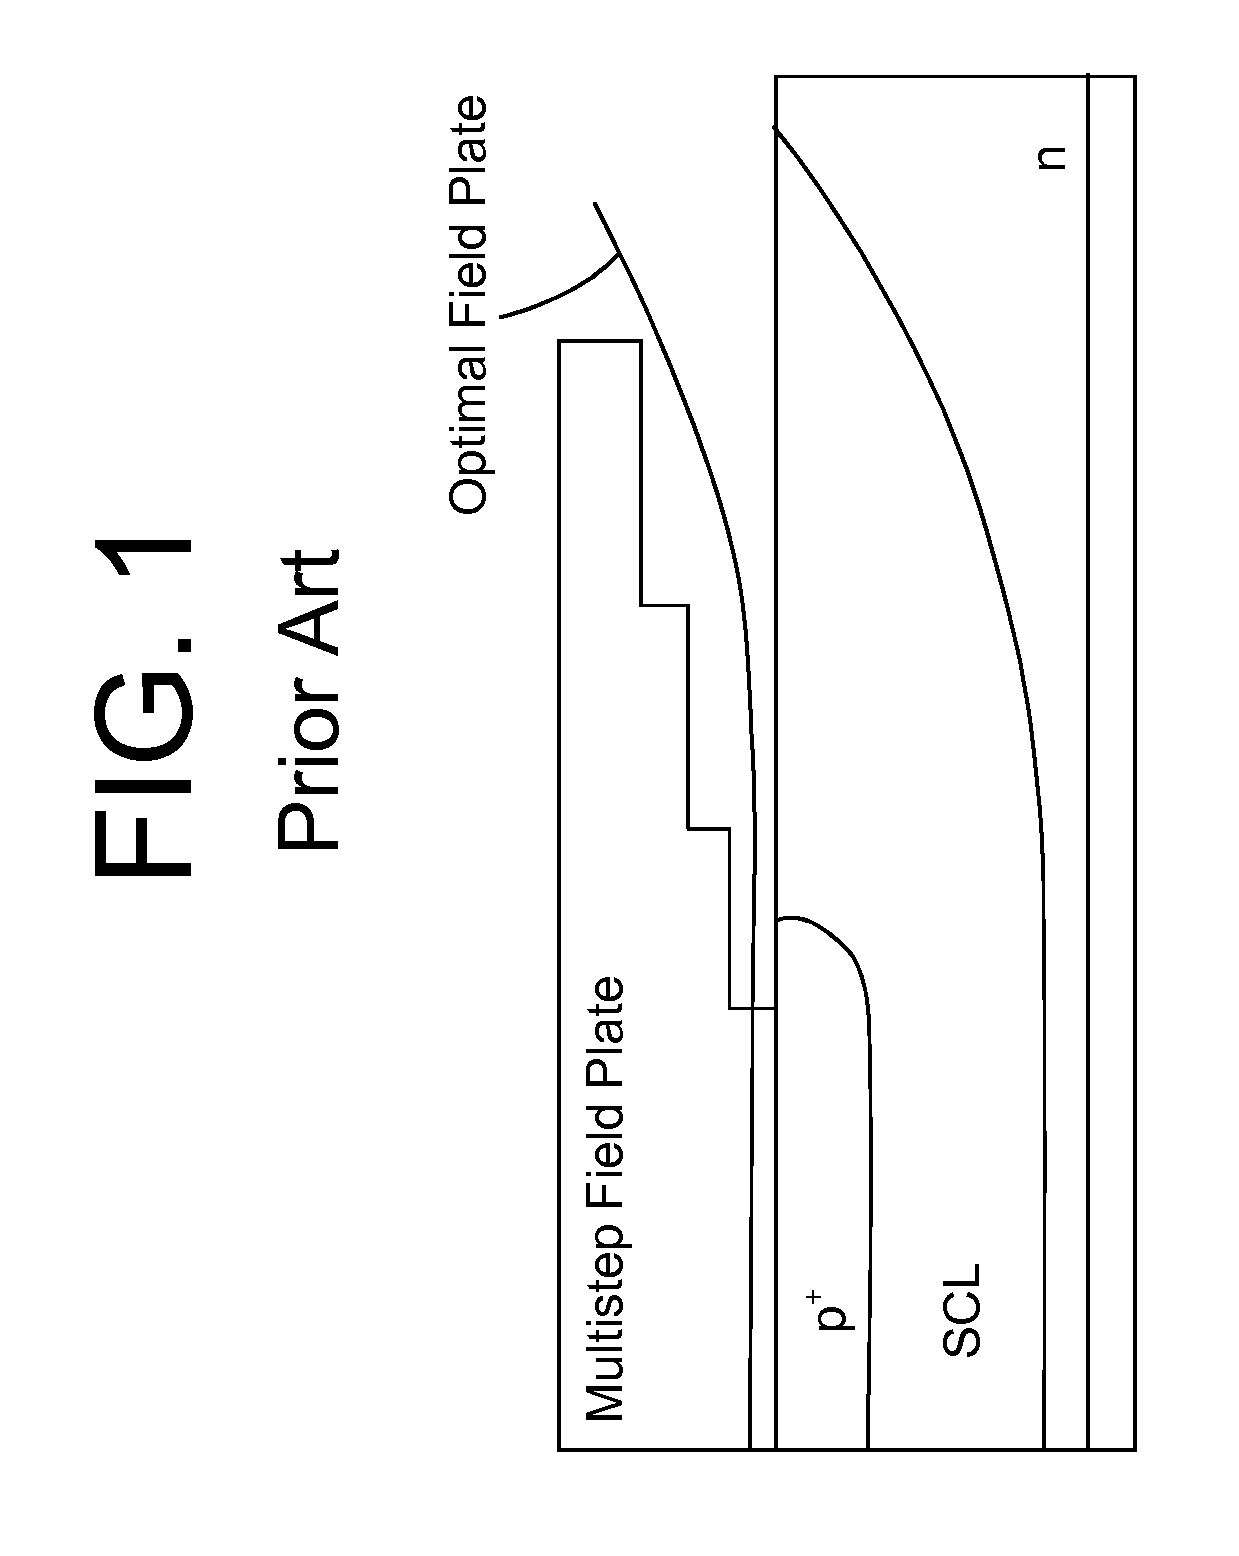 Profiled contact for semiconductor device